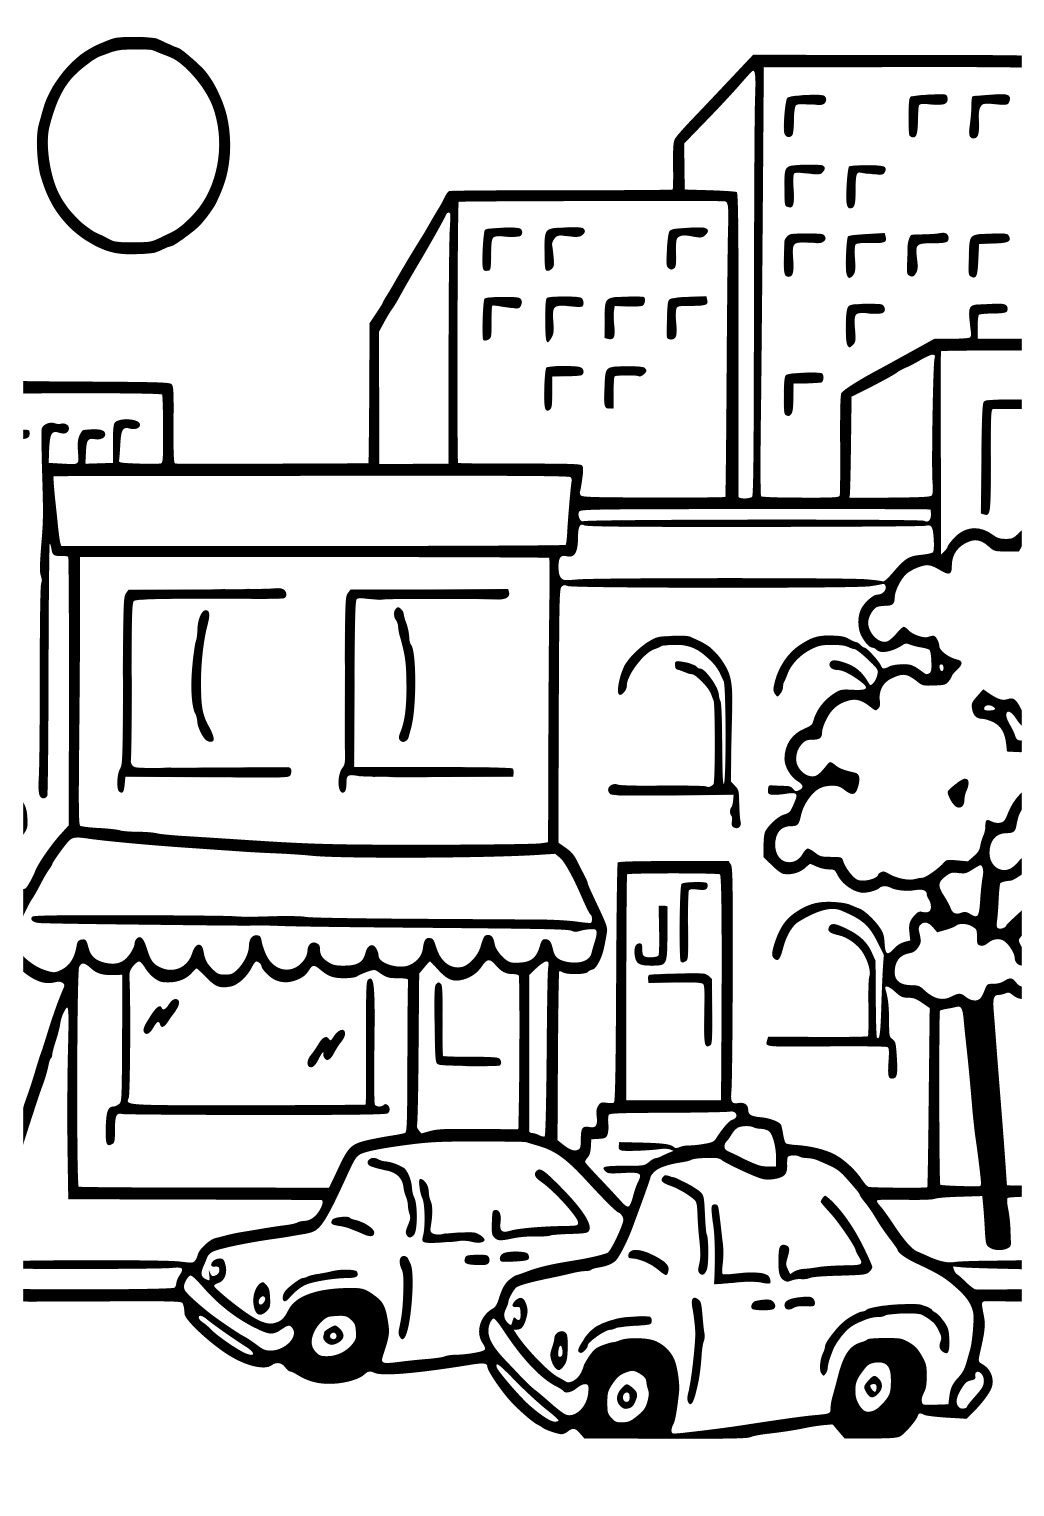 Free printable city street coloring page for adults and kids